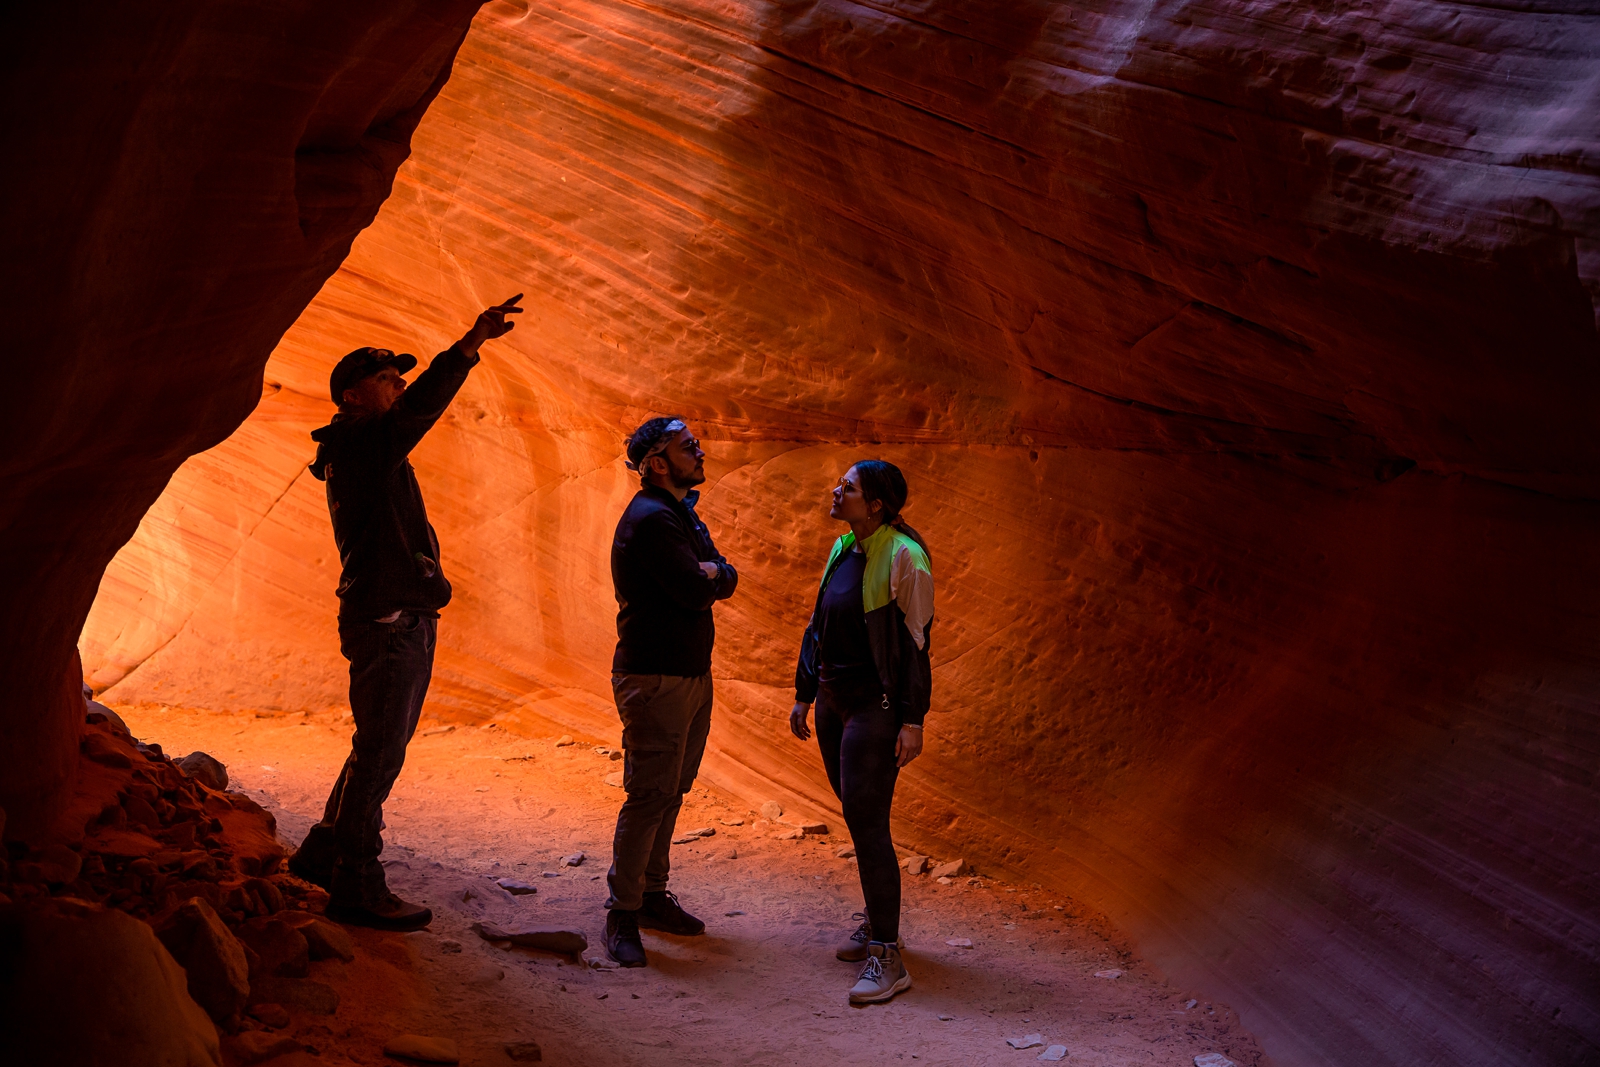 A Couple and their tour guide walking through the Utah slot canyon during their hiking adventure through the antelope canyon